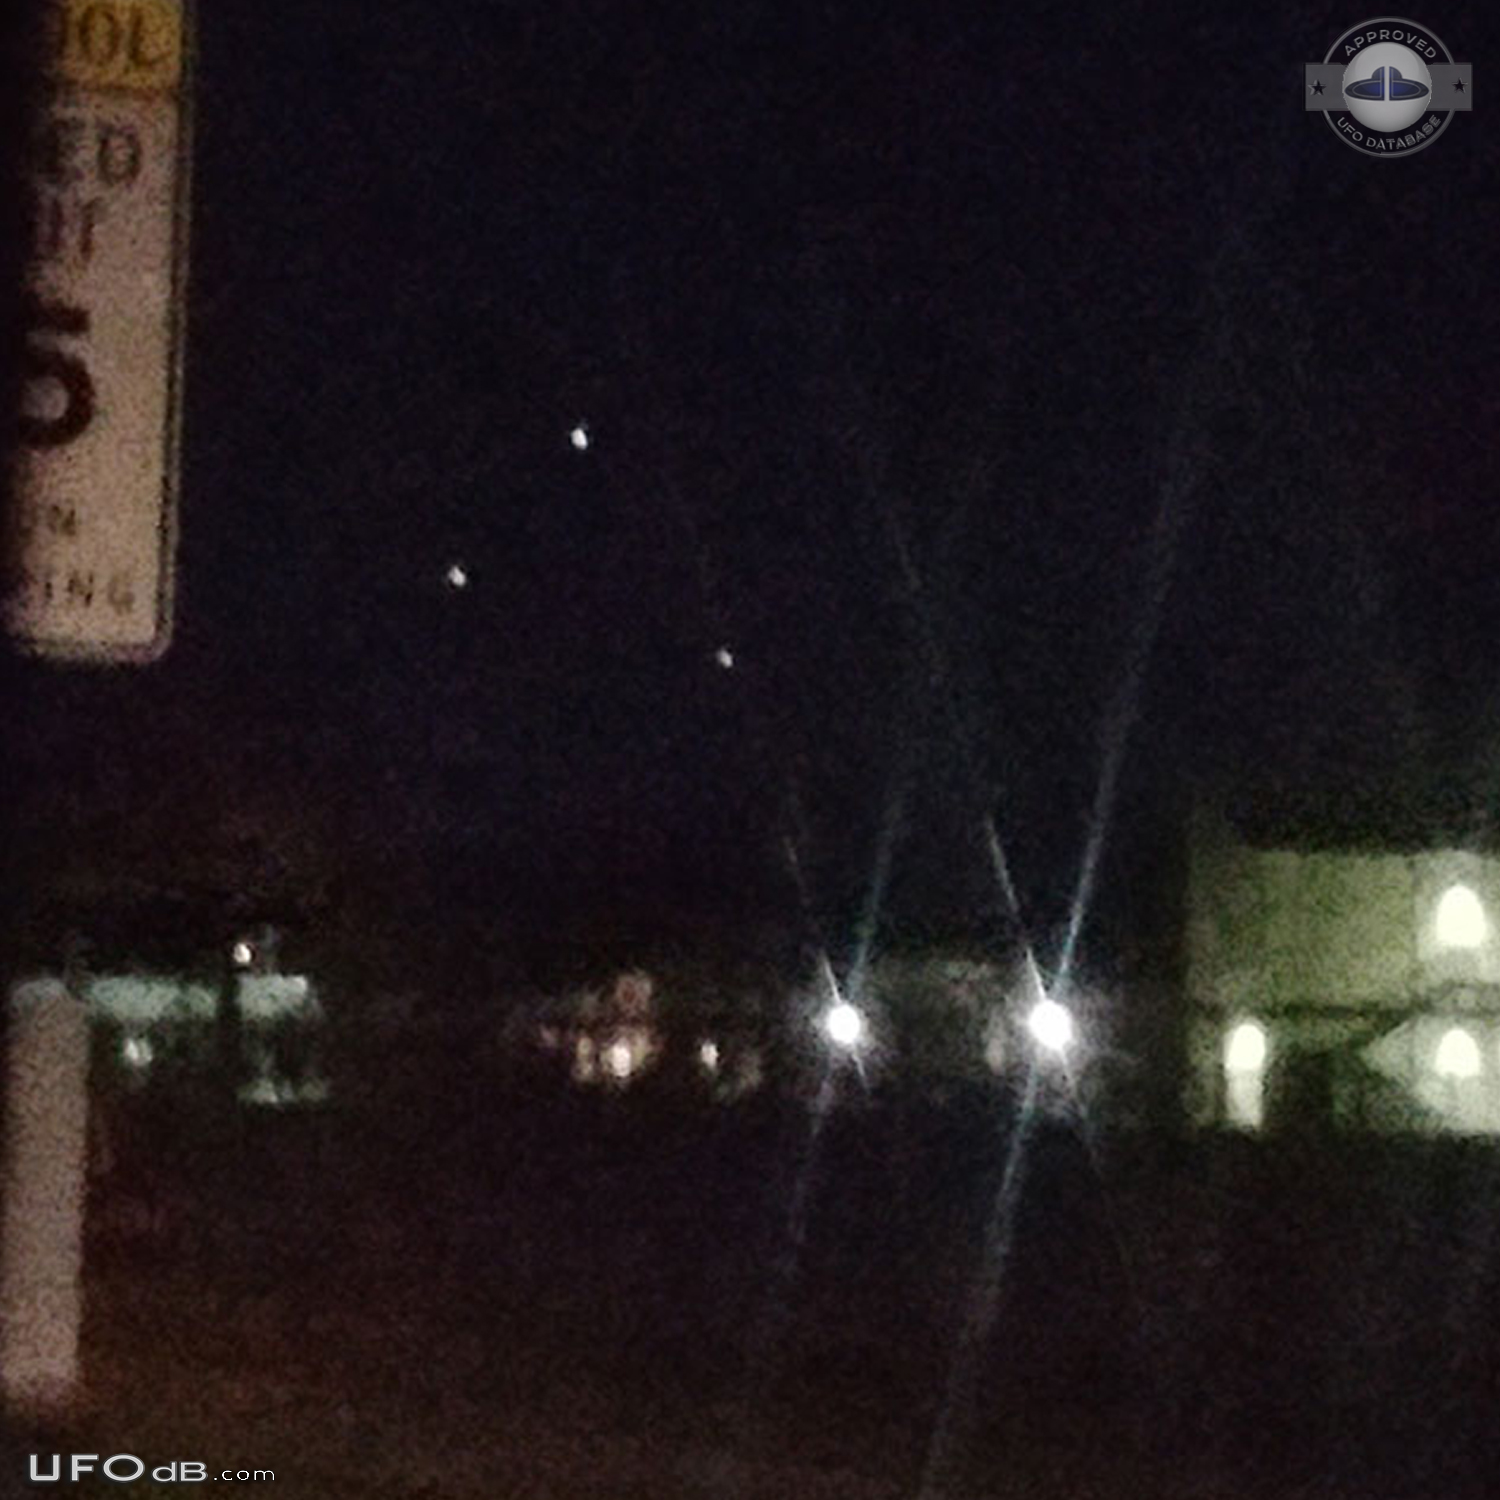 Me and coworker driving and saw the UFOs - Saint Cloud Florida USA 201 UFO Picture #780-2